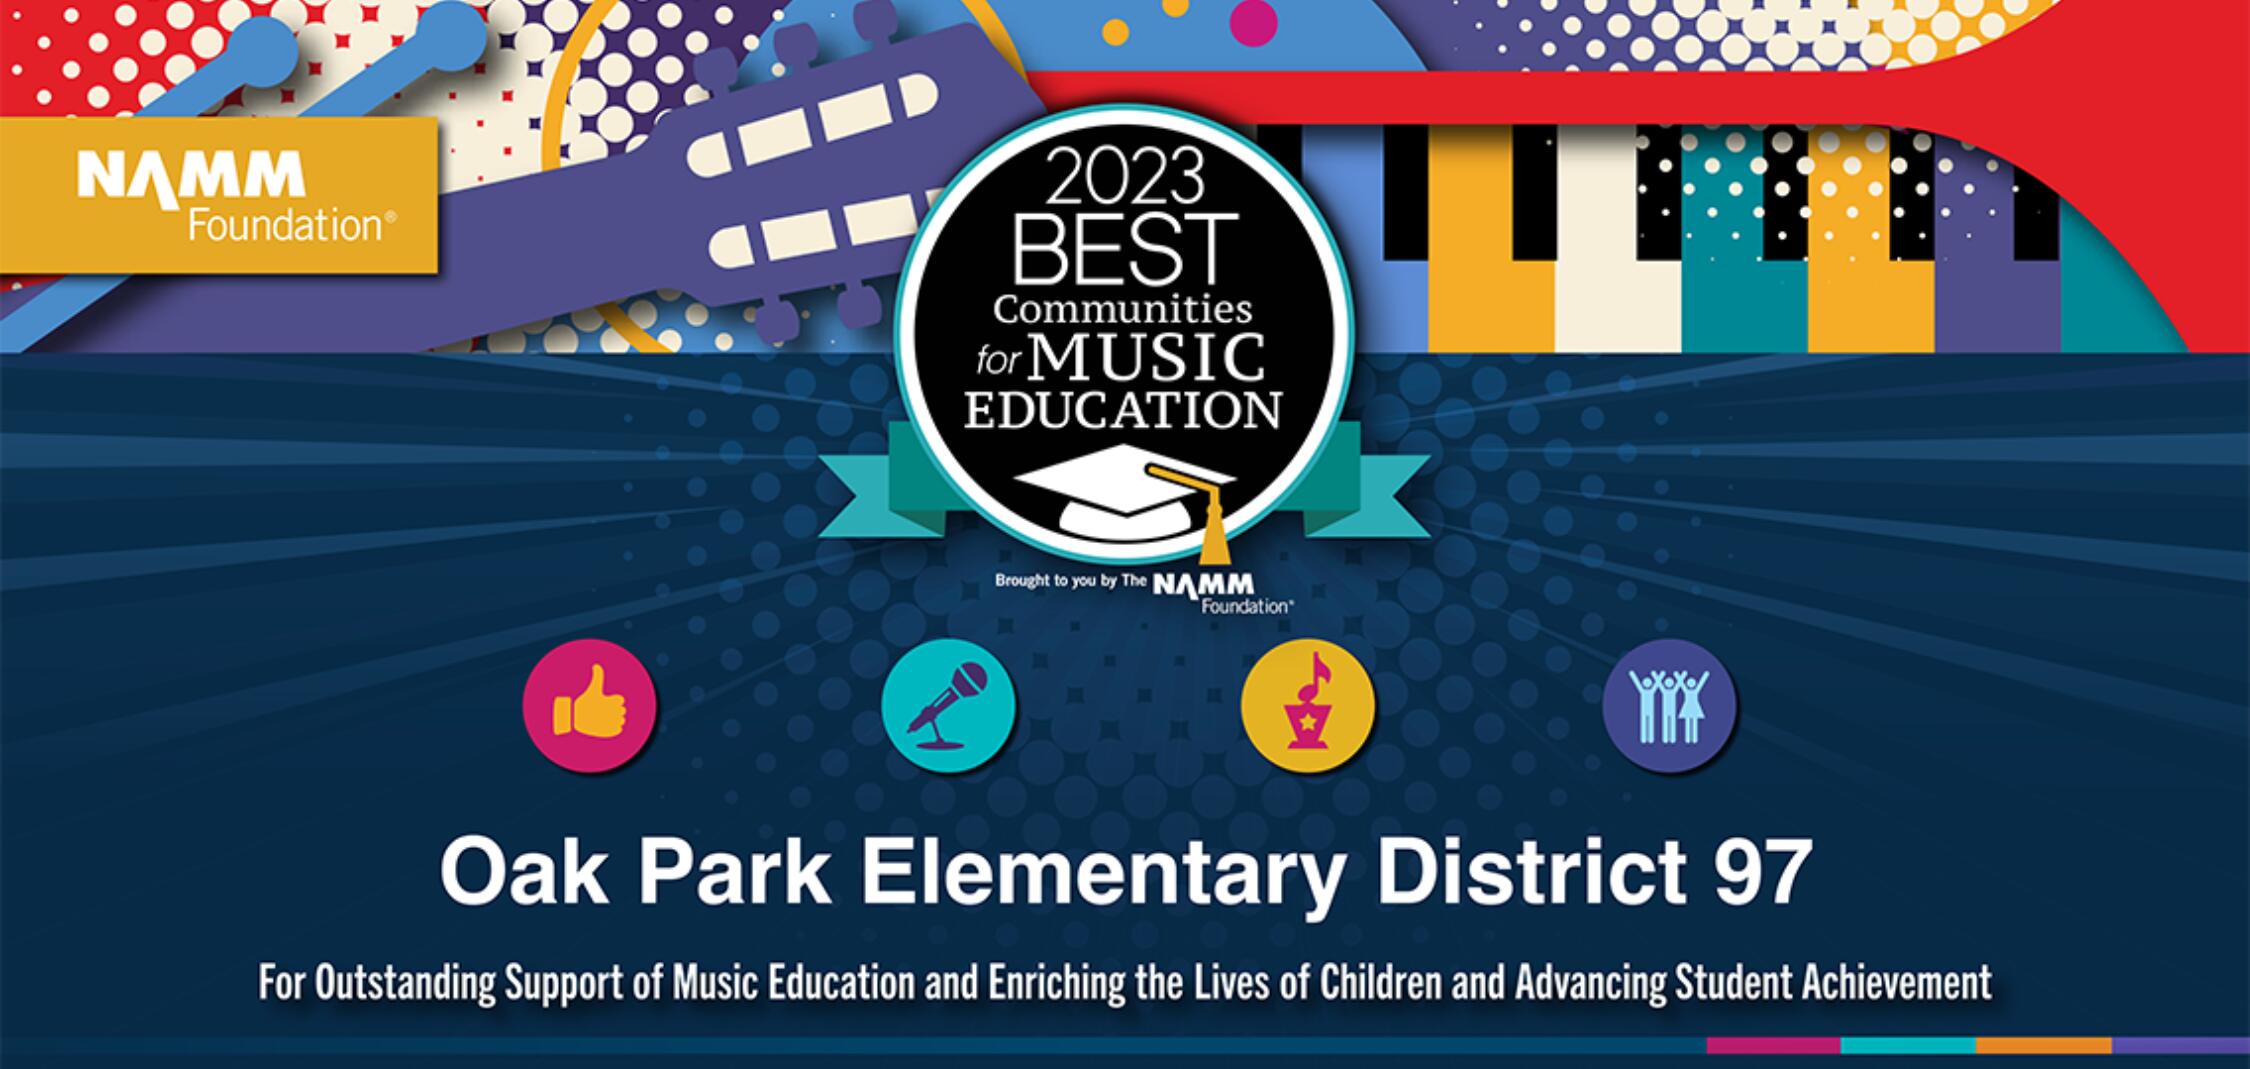 D97 Recognized Nationally for Music Education